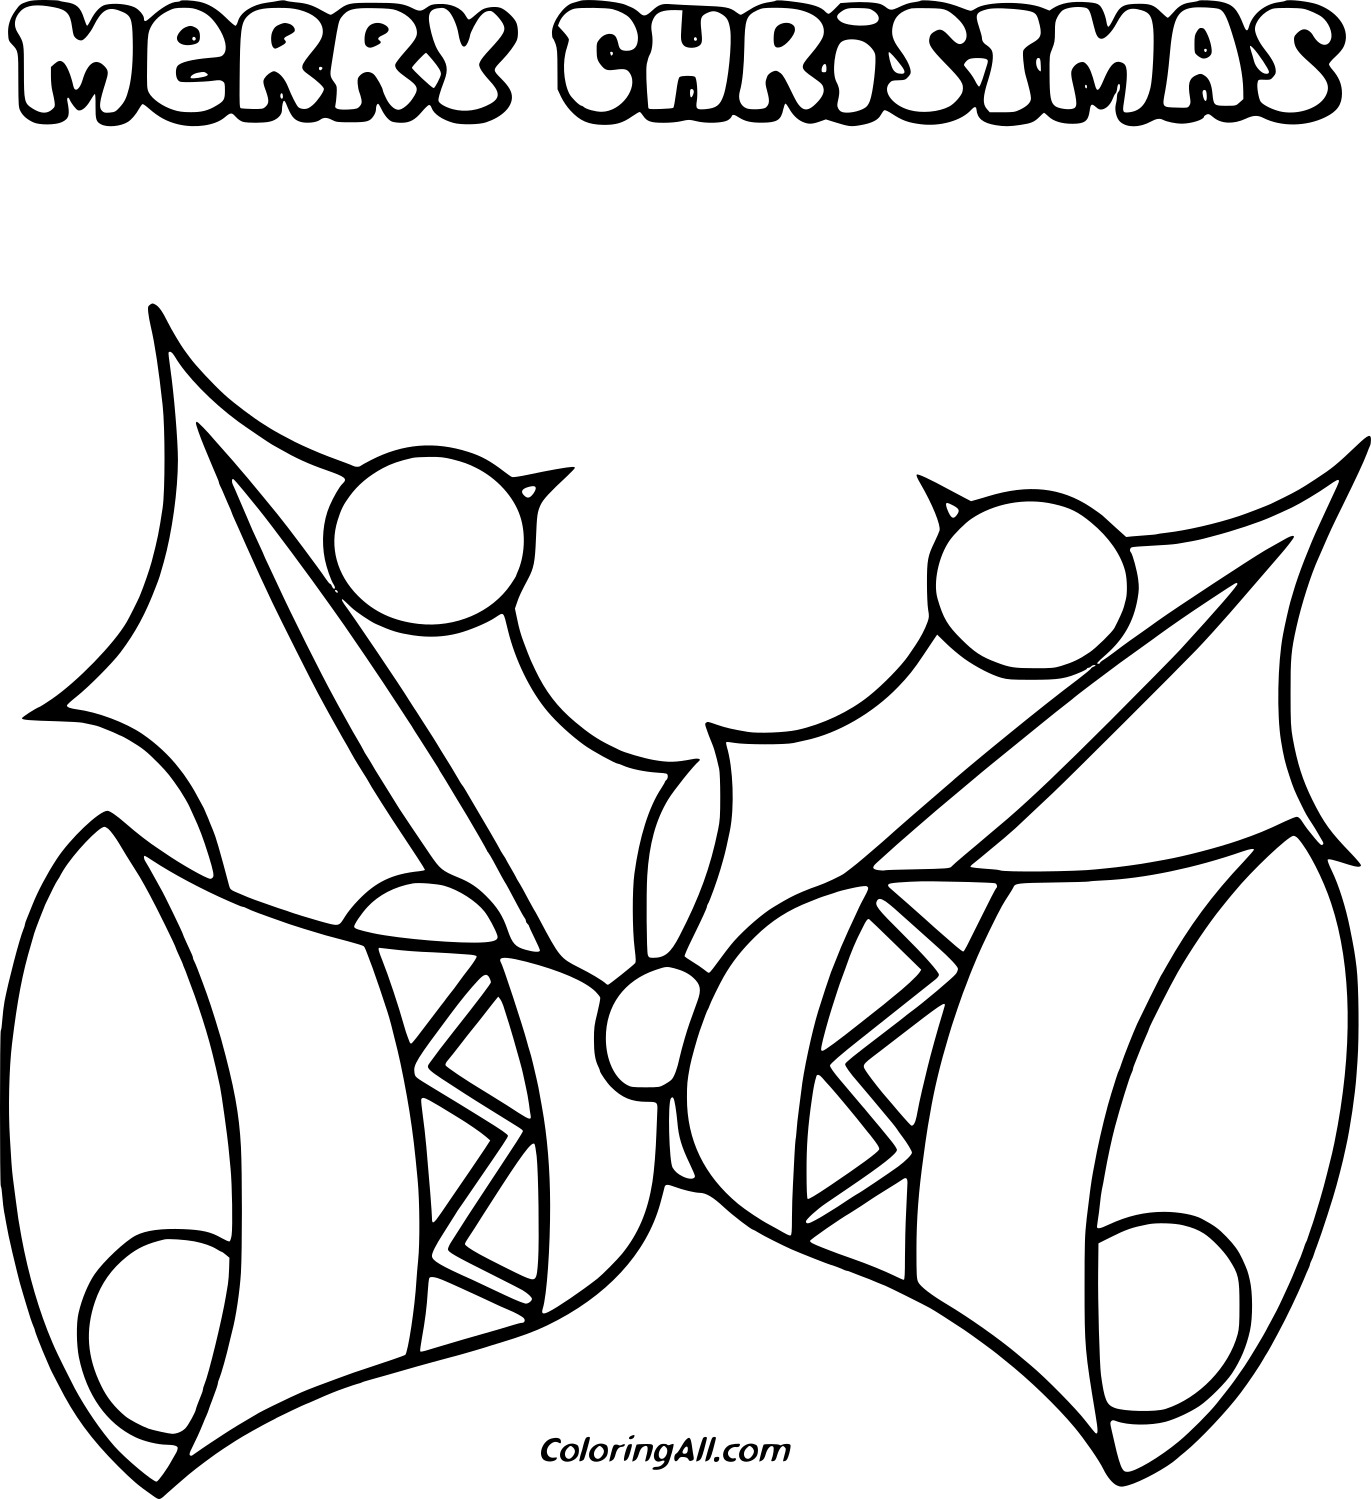 Merry Christmas Bells Image For Kids